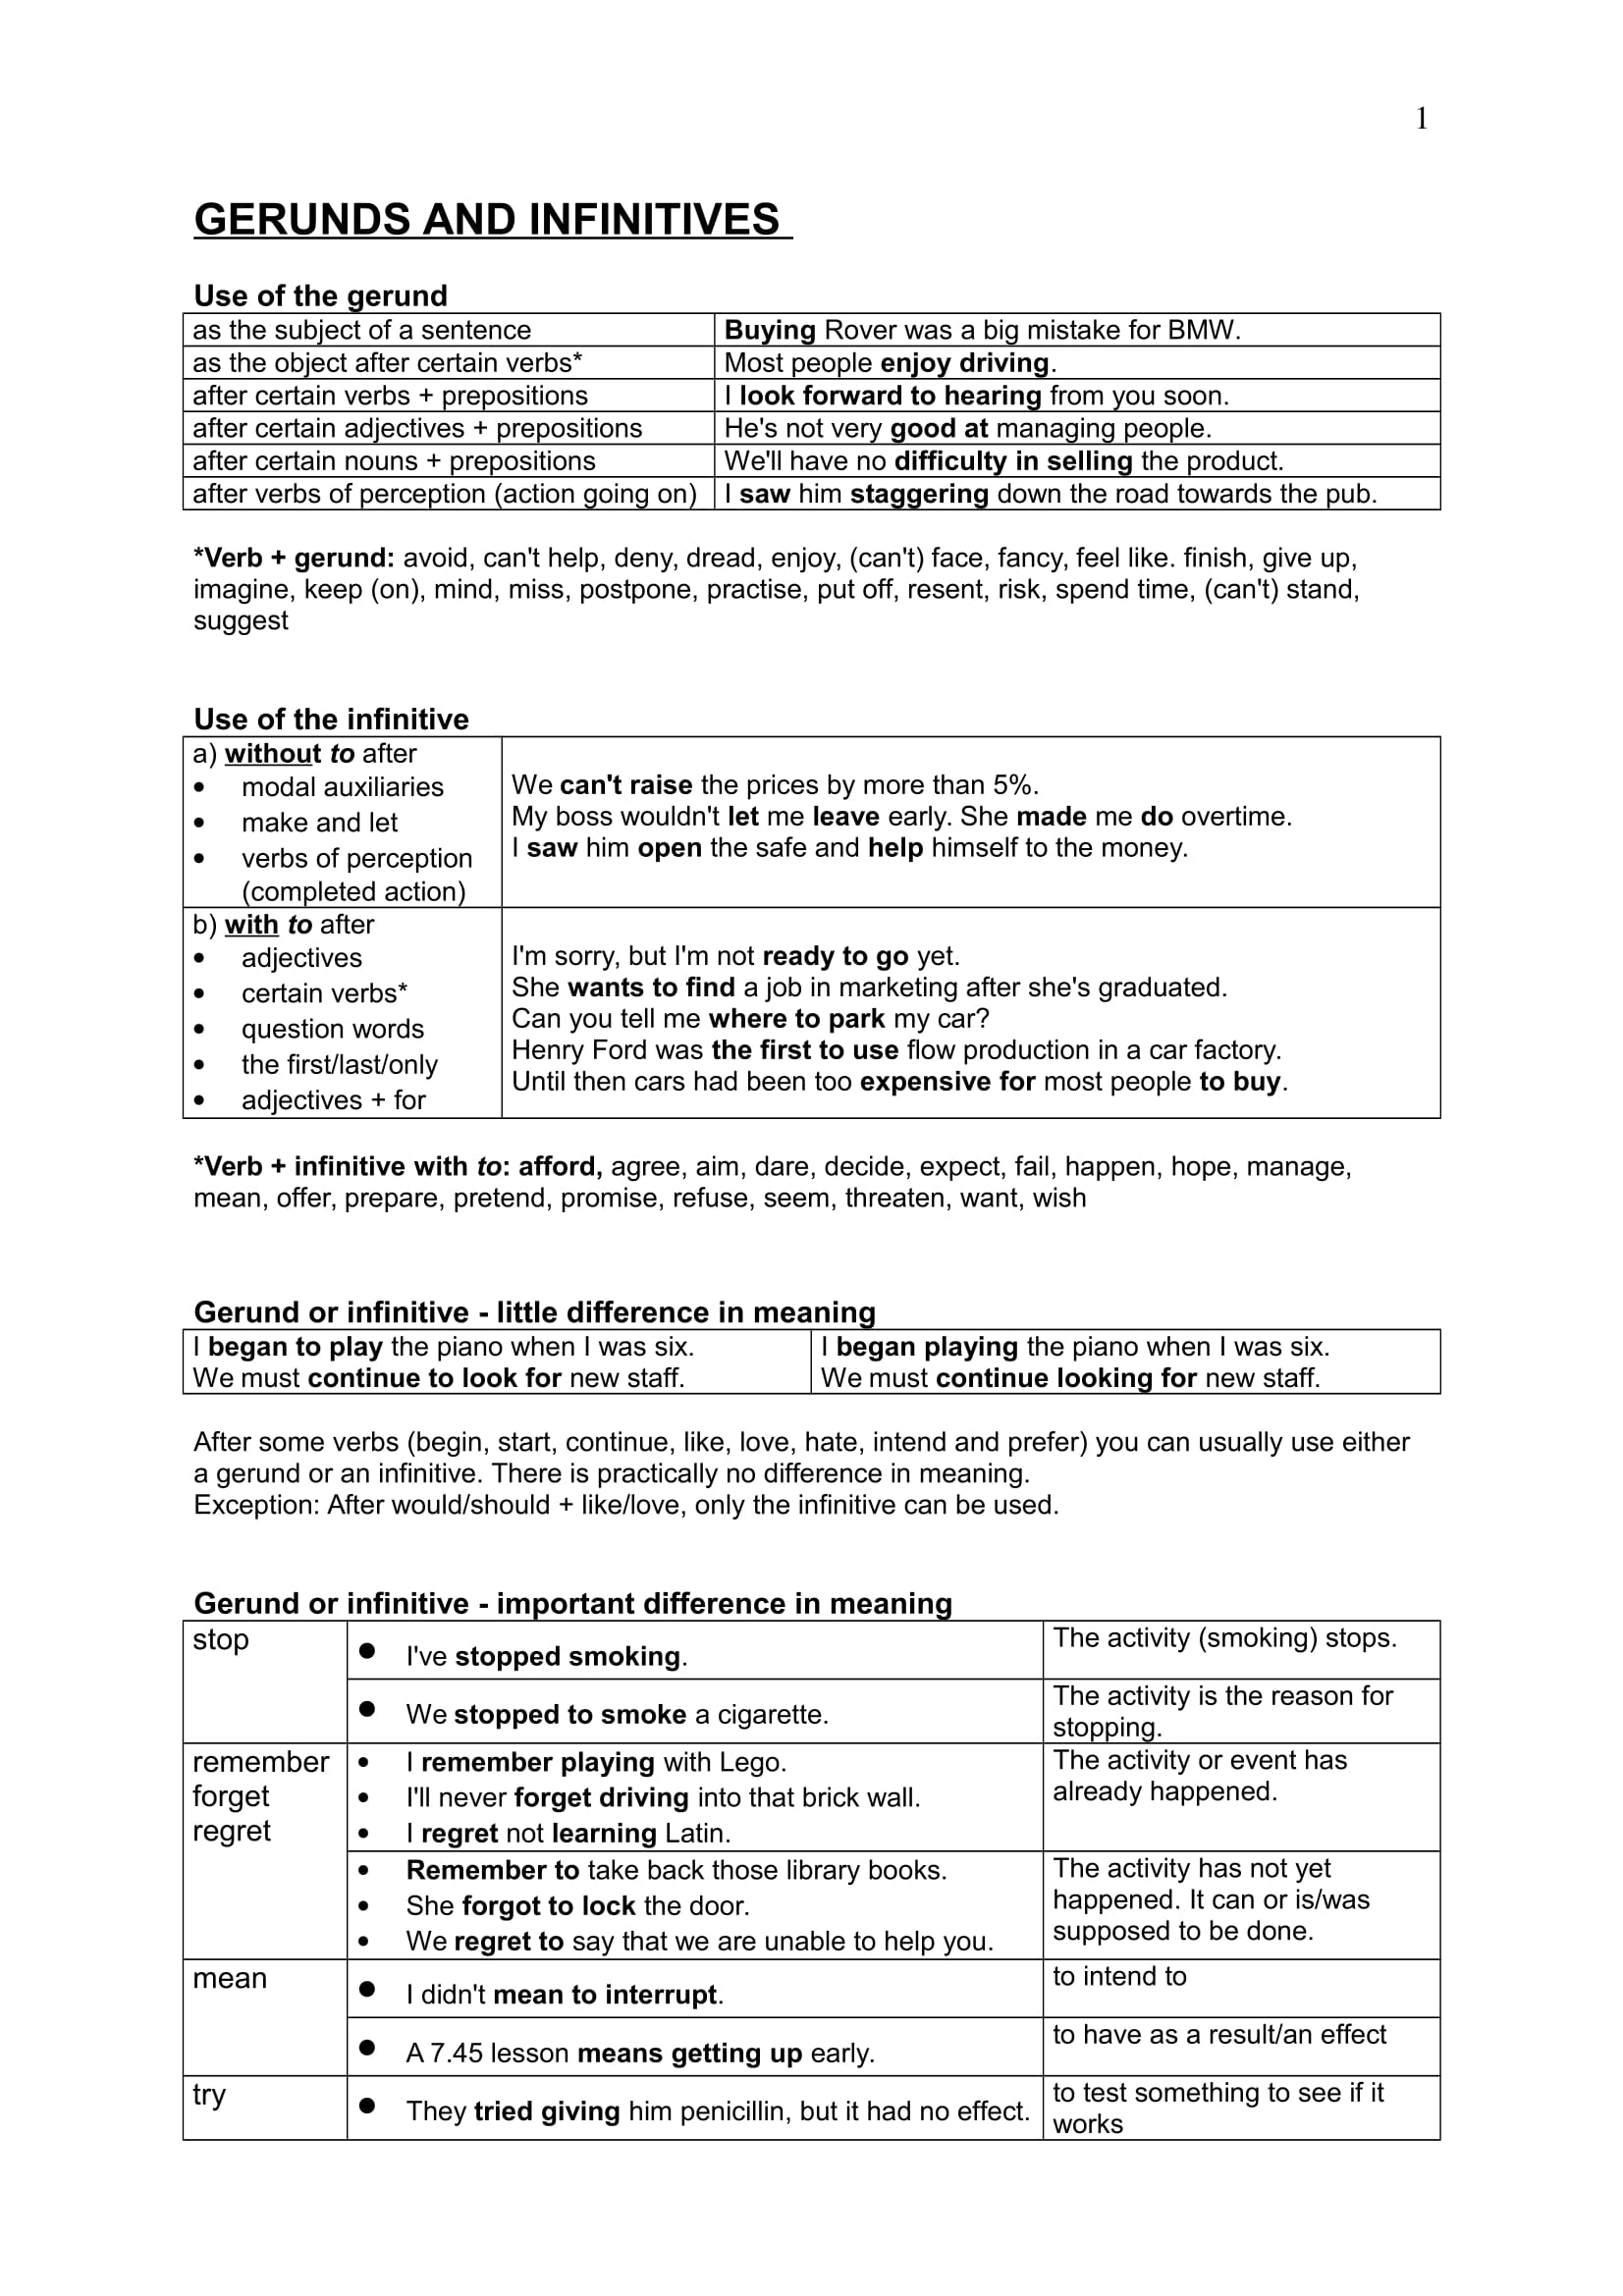 gerunds and infinitives practice worksheet example